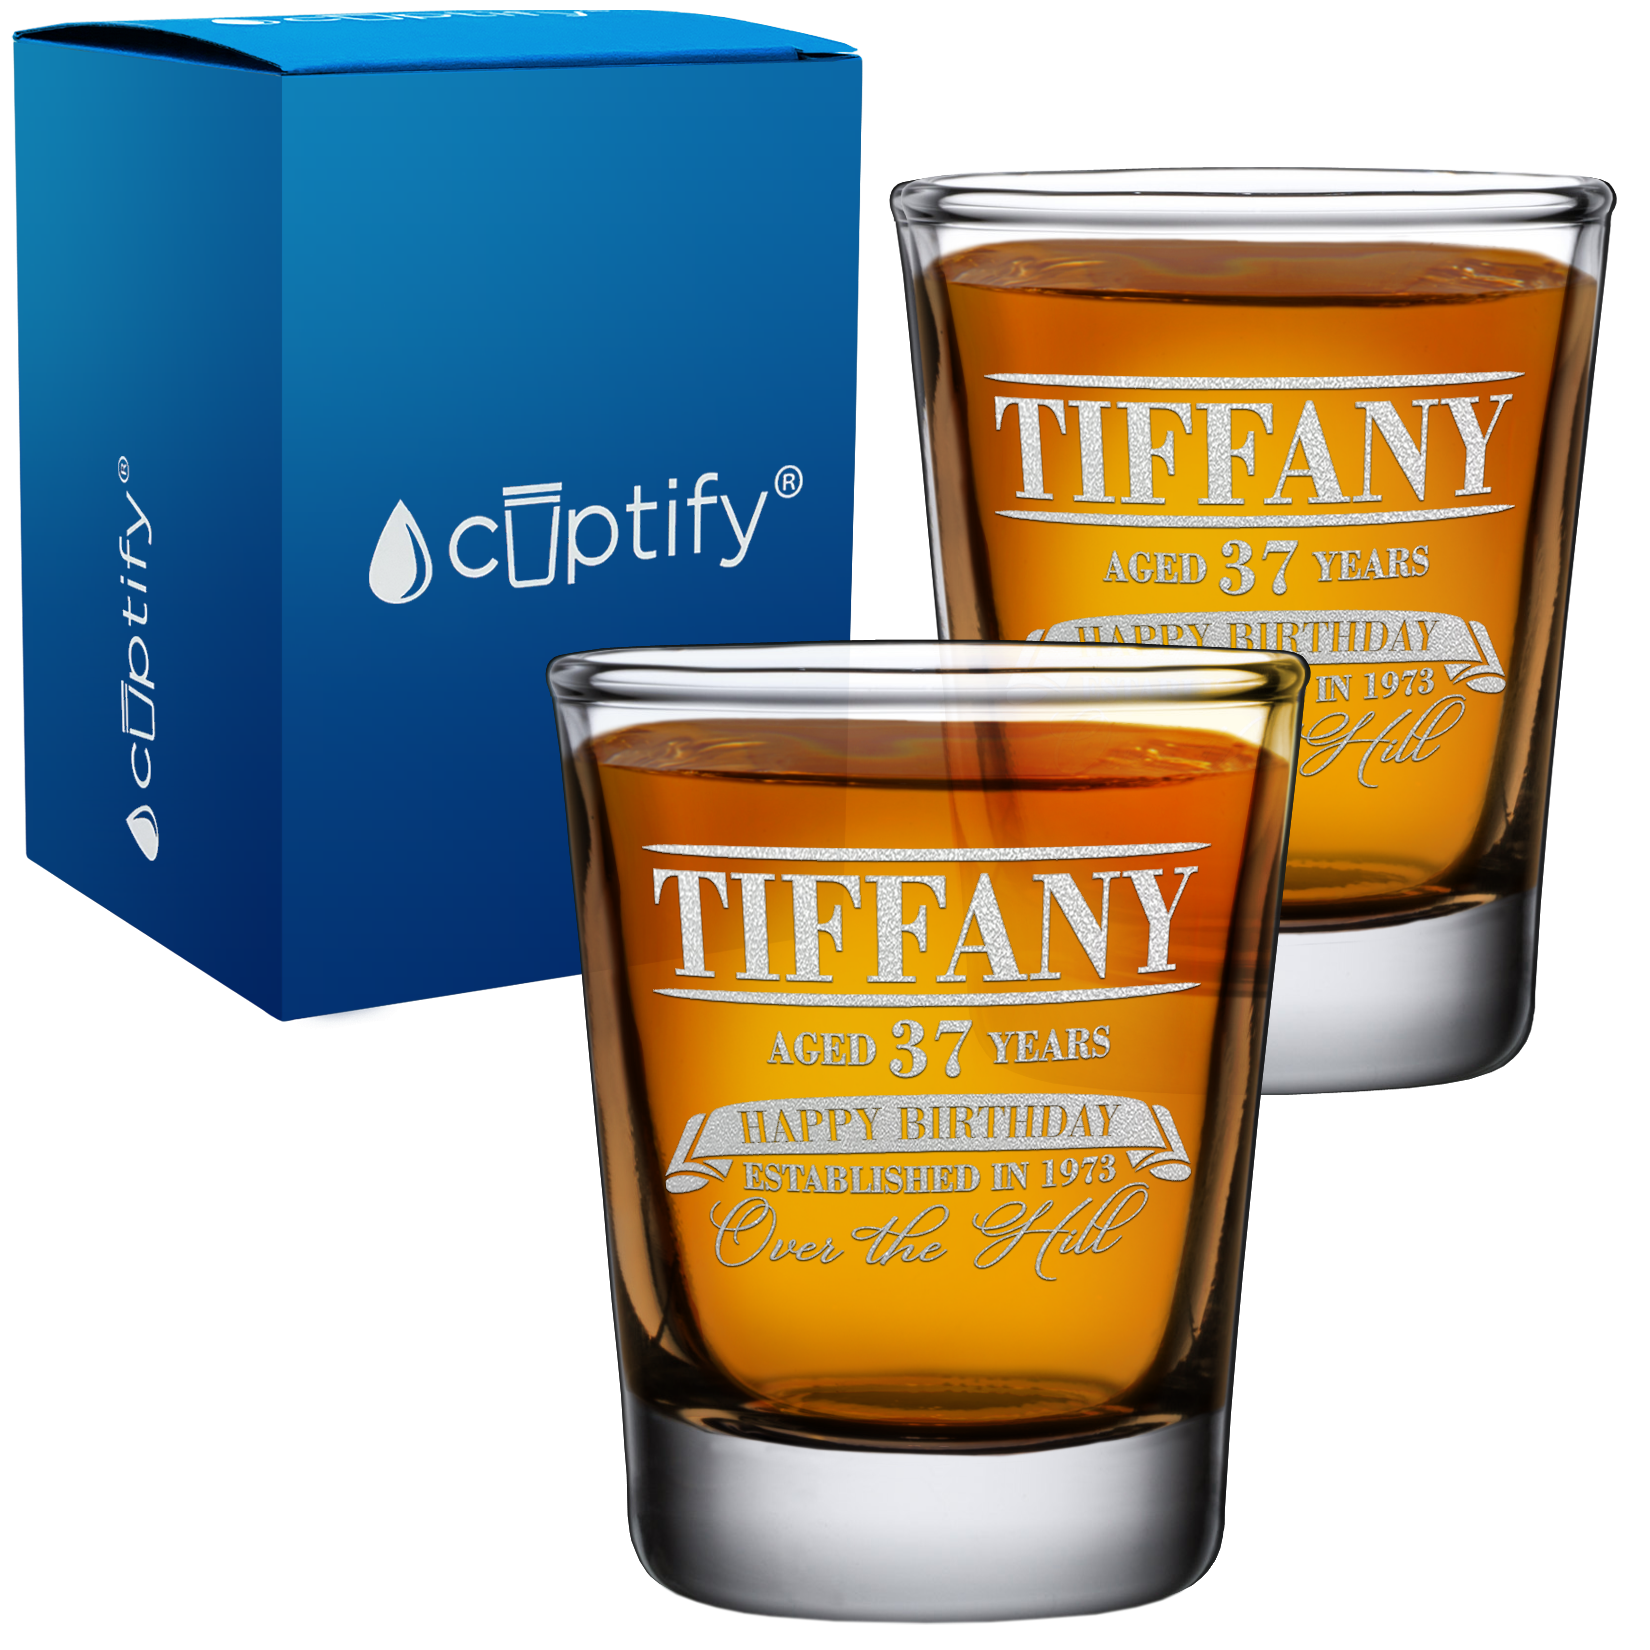 Personalized Over the Hill Birthday 2oz Shot Glasses - Set of 2